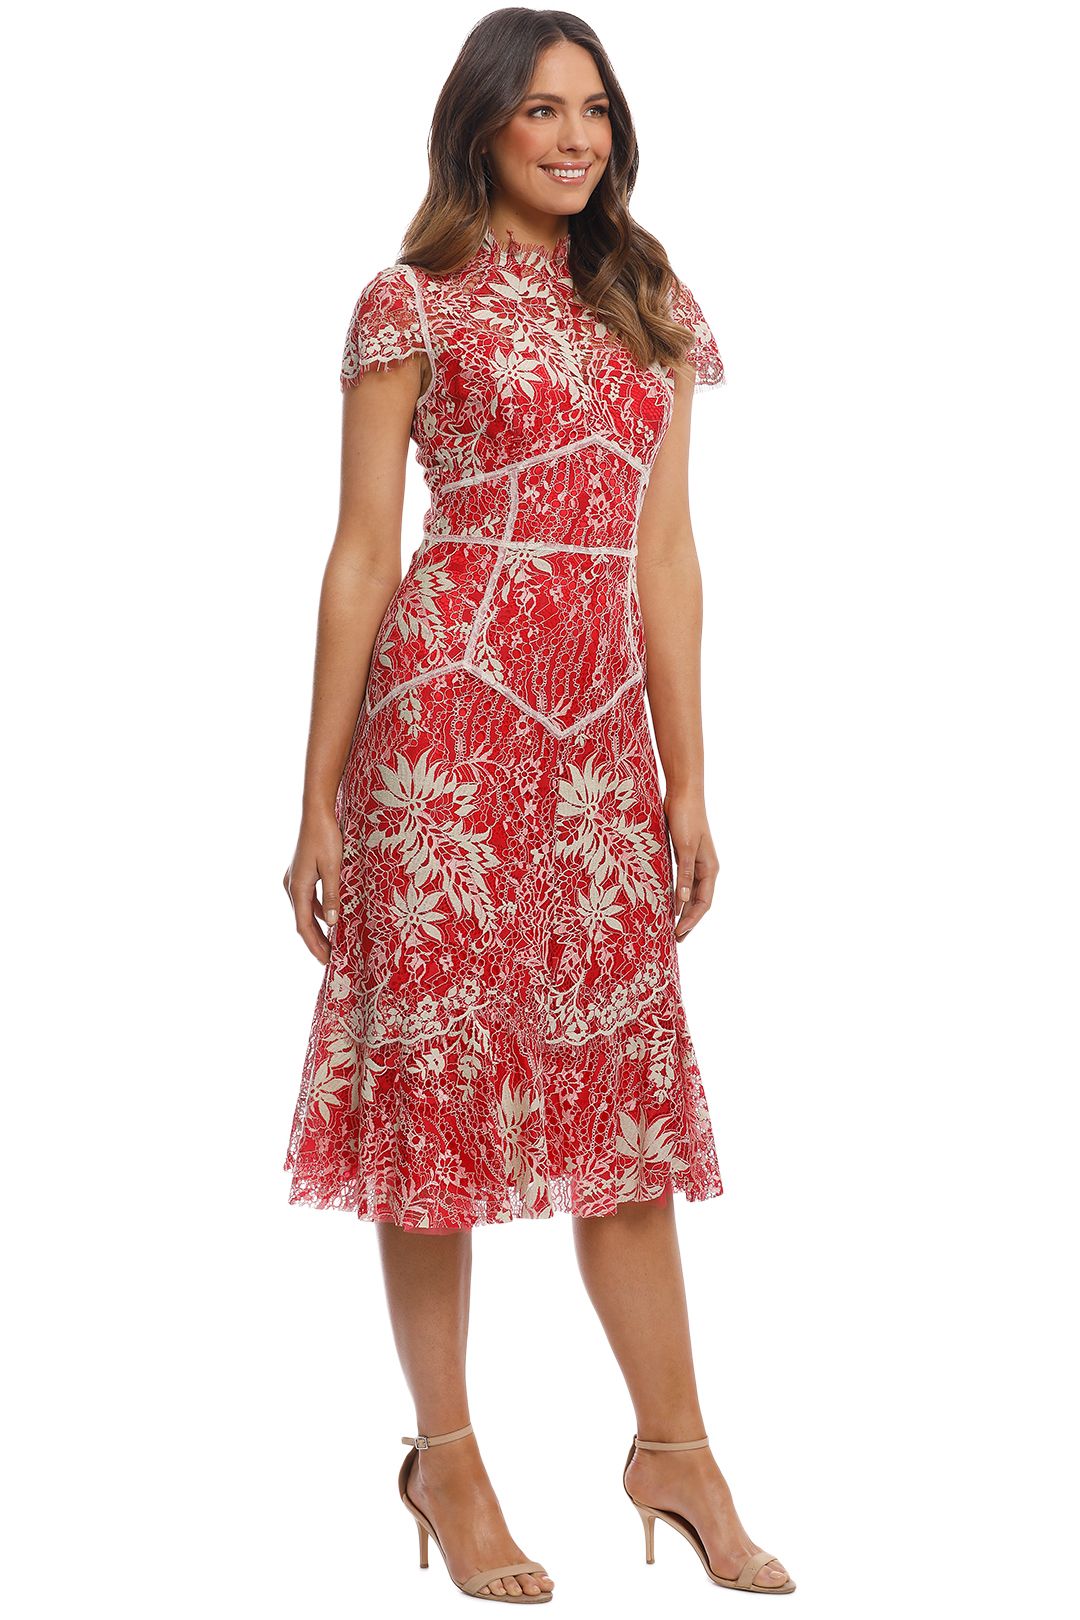 Moss and Spy - Annika High Neck Dress - Red - Side